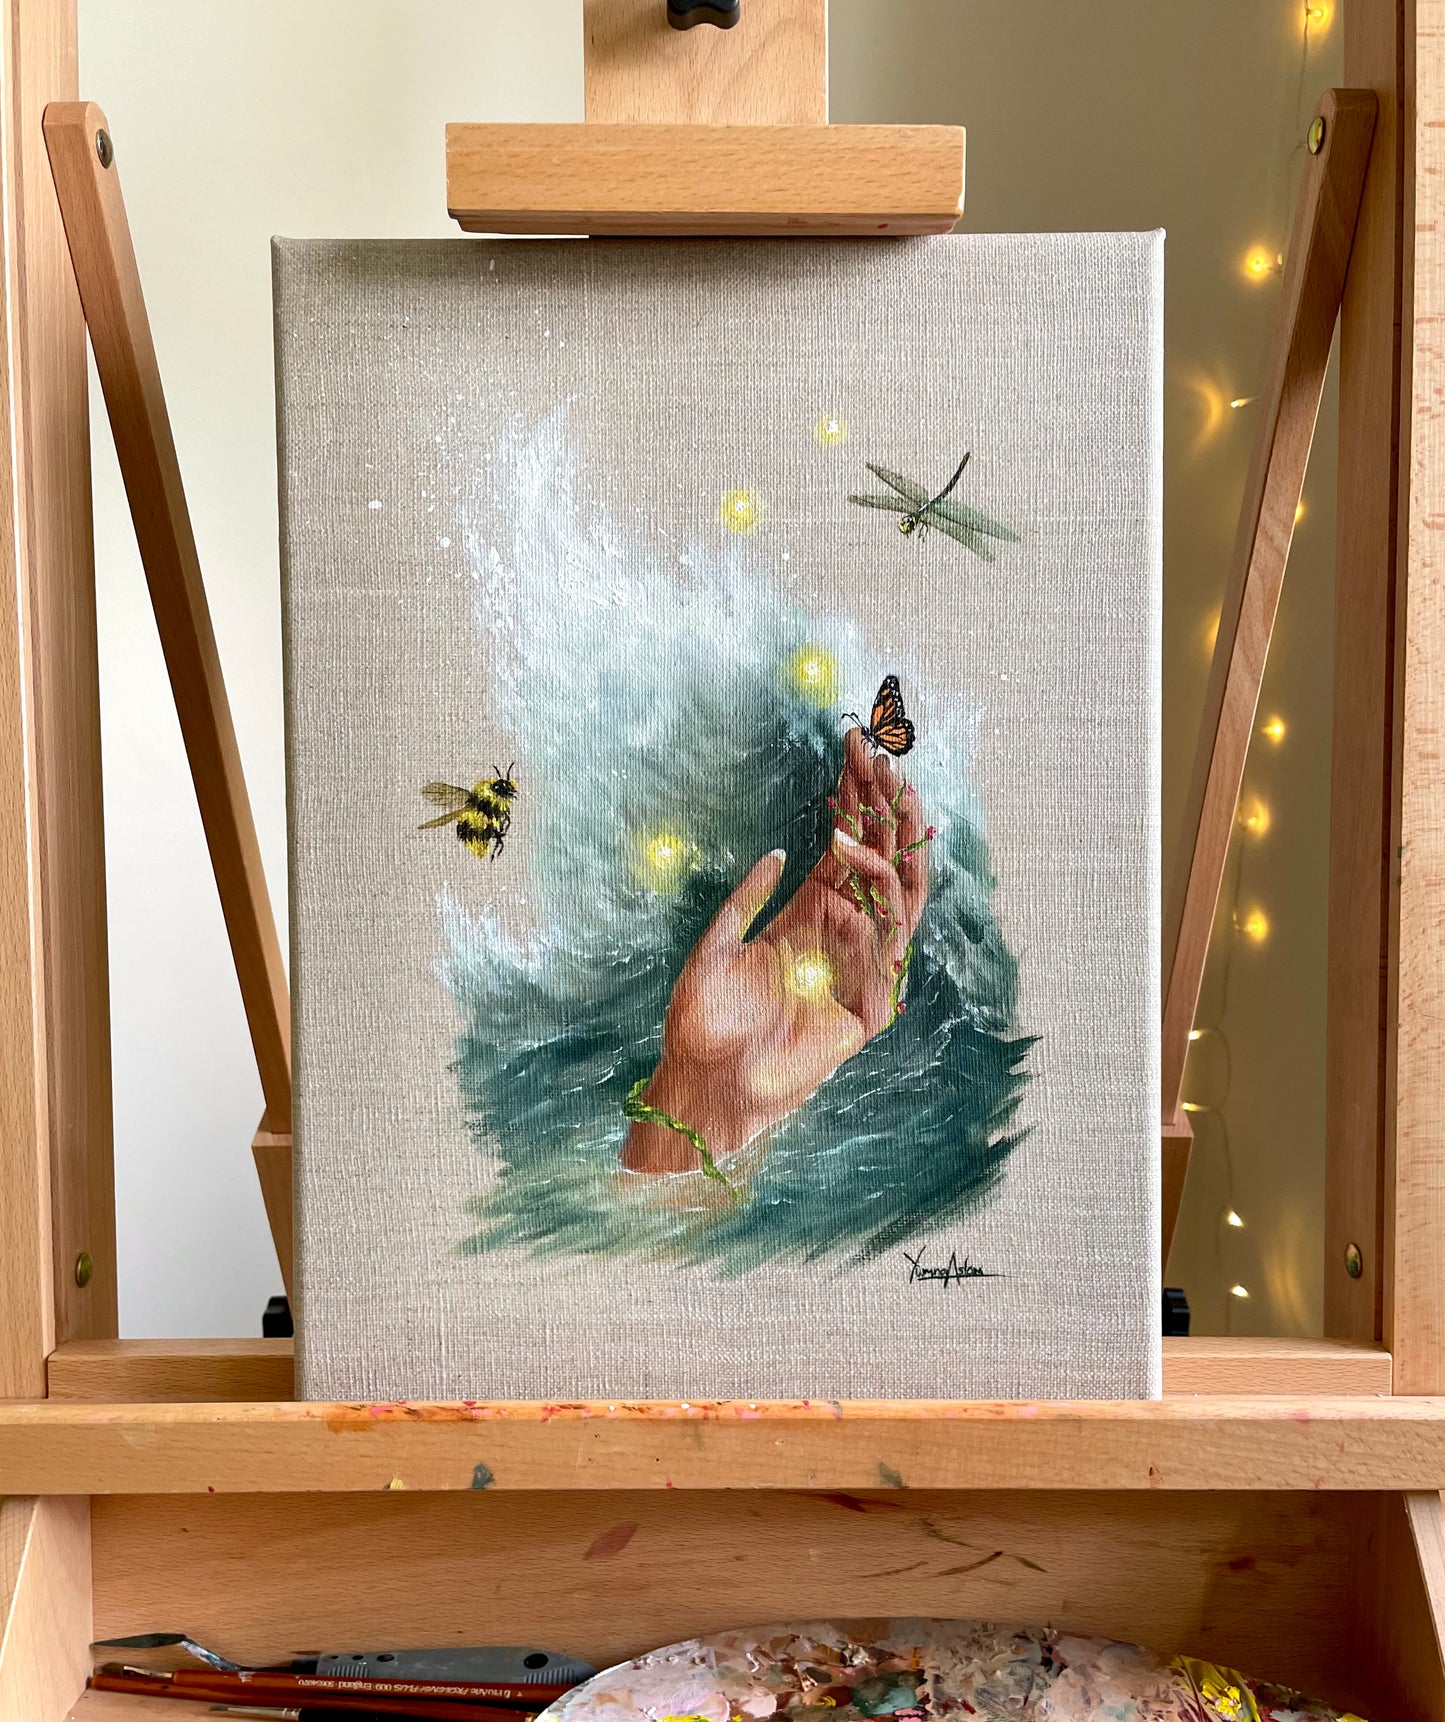 ‘The Miracle’ Original Oil painting